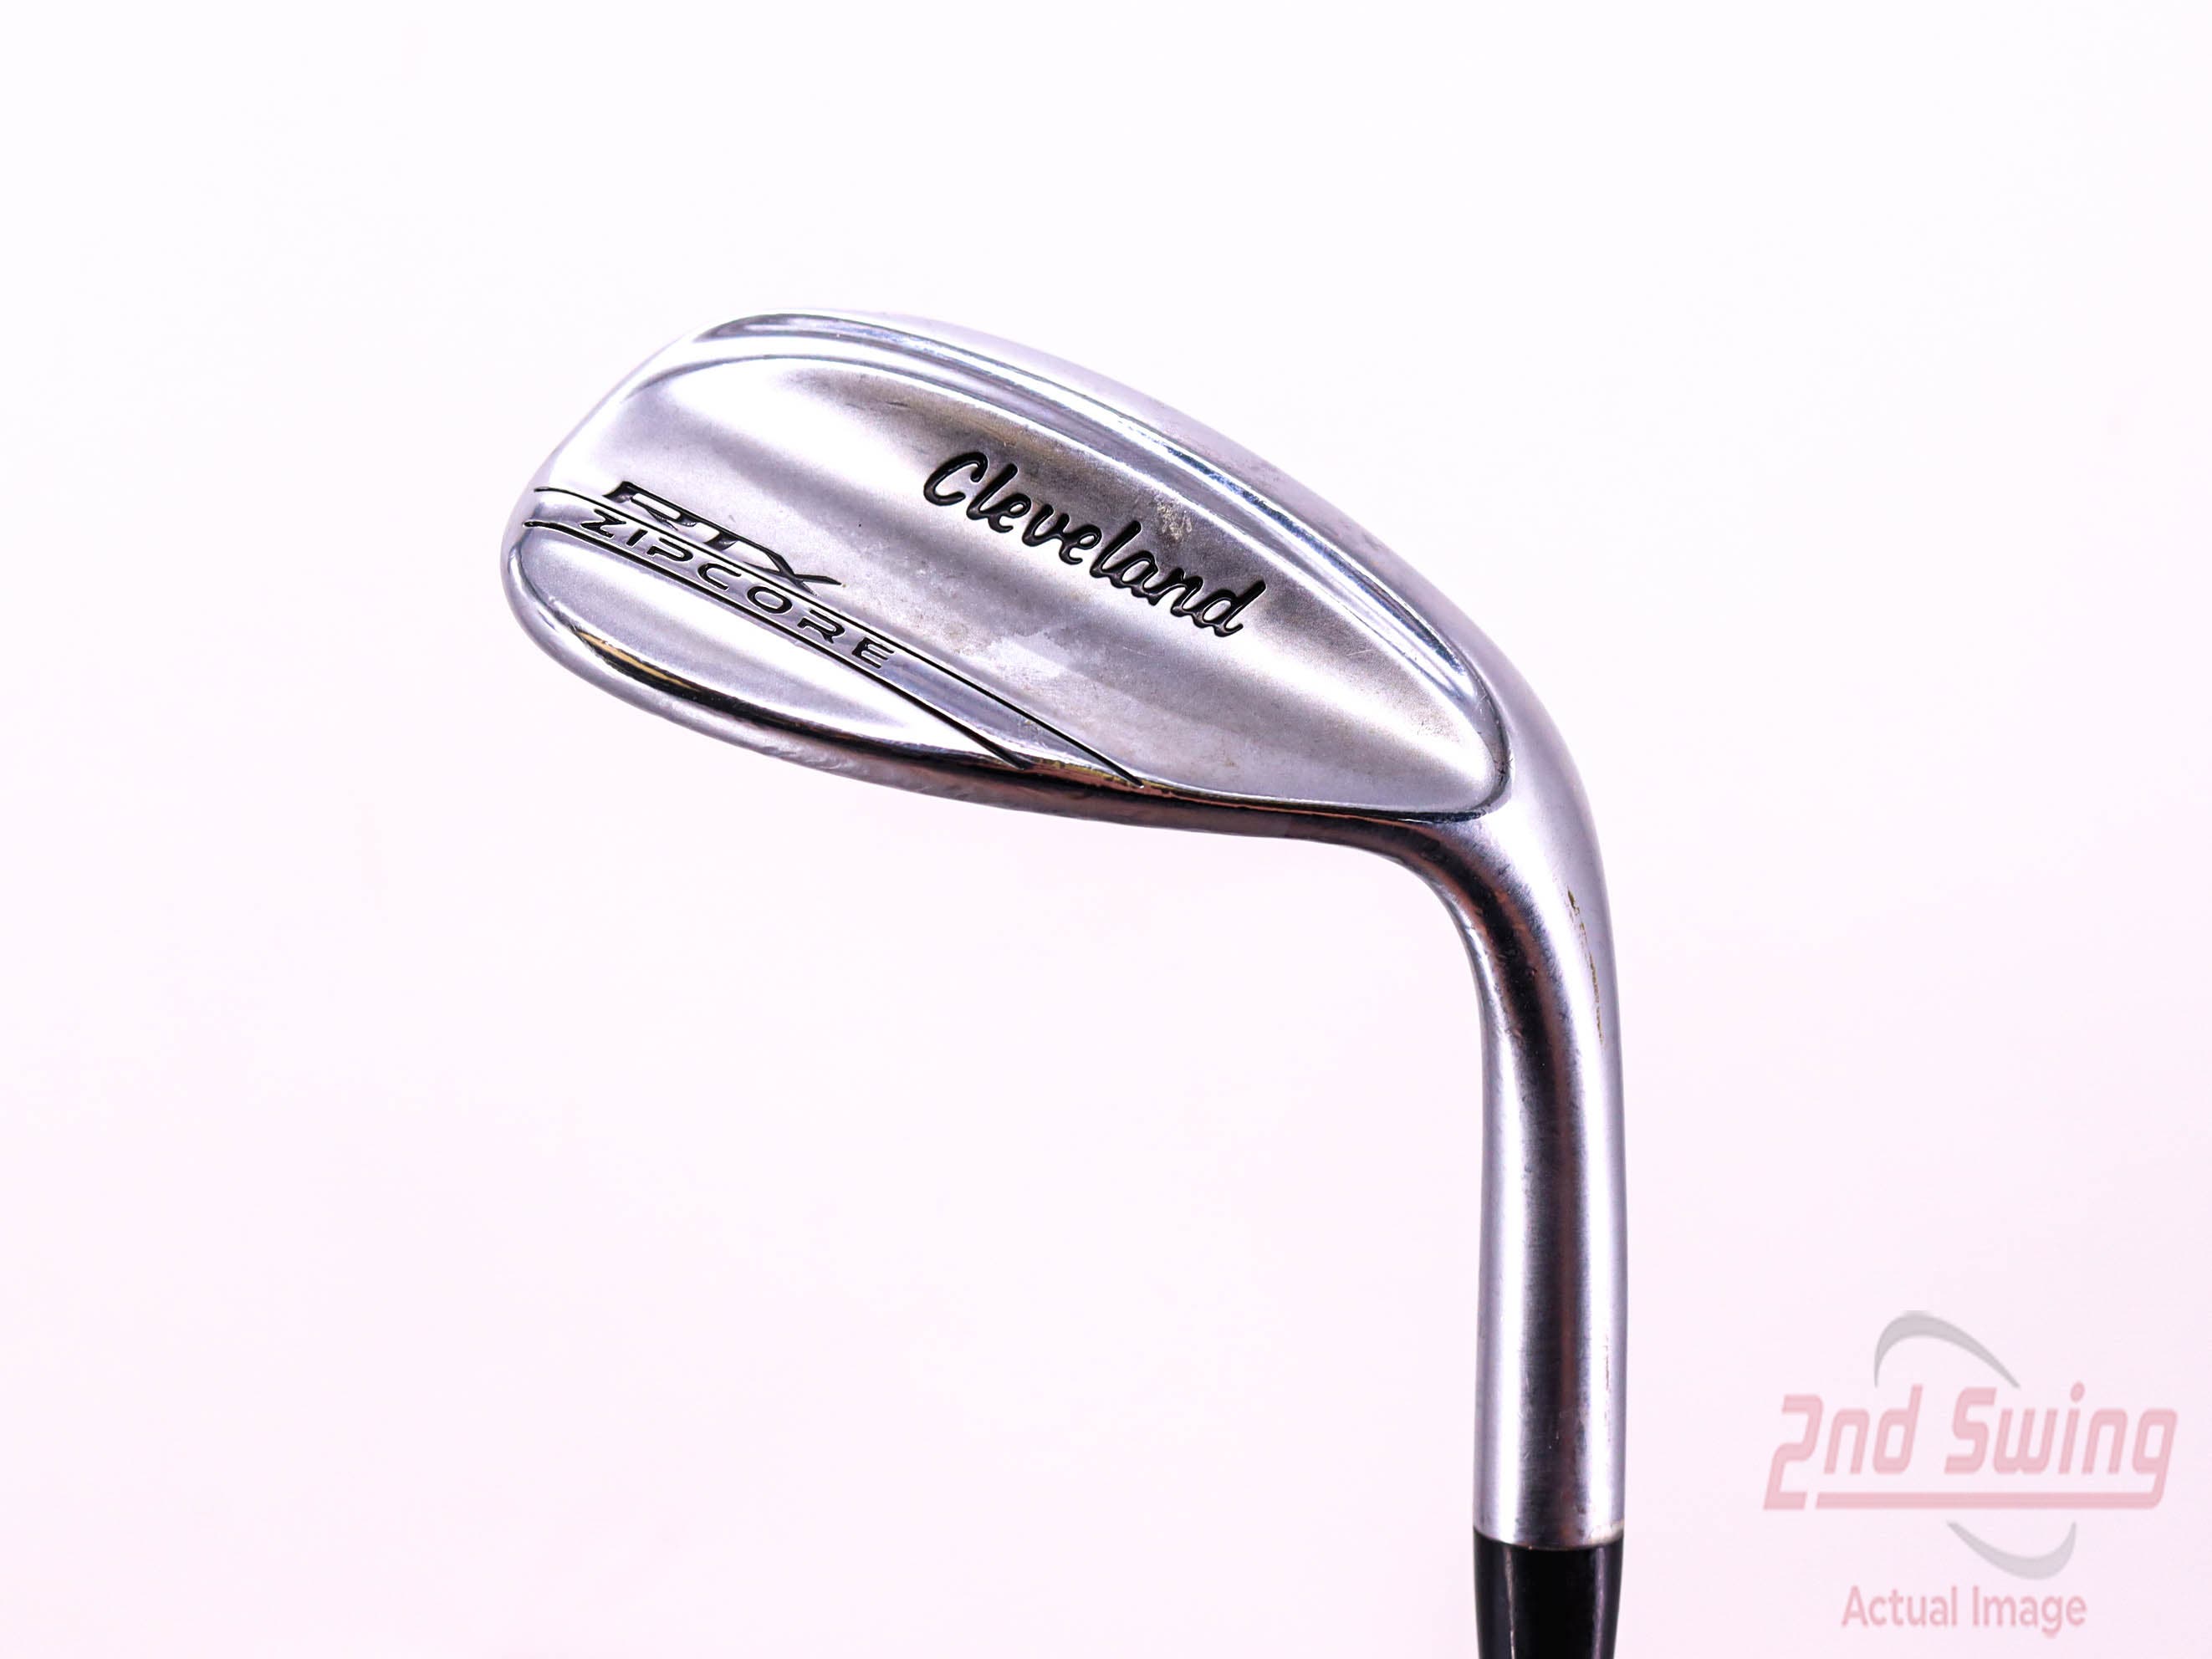 Cleveland RTX ZipCore Tour Satin Wedge (D-32329780166) | 2nd Swing 